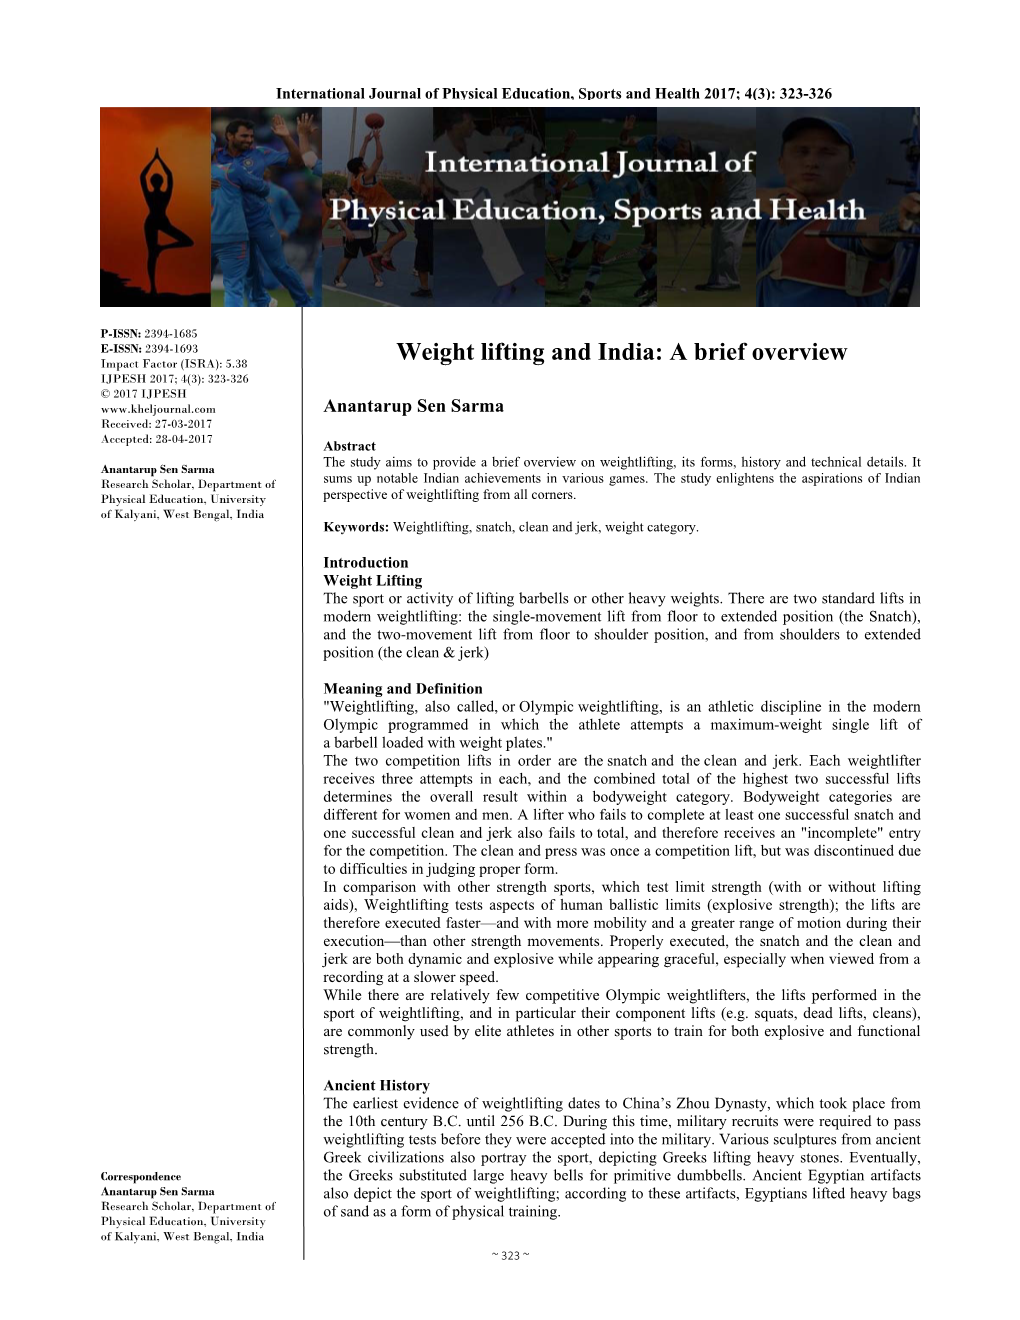 Weight Lifting and India: a Brief Overview